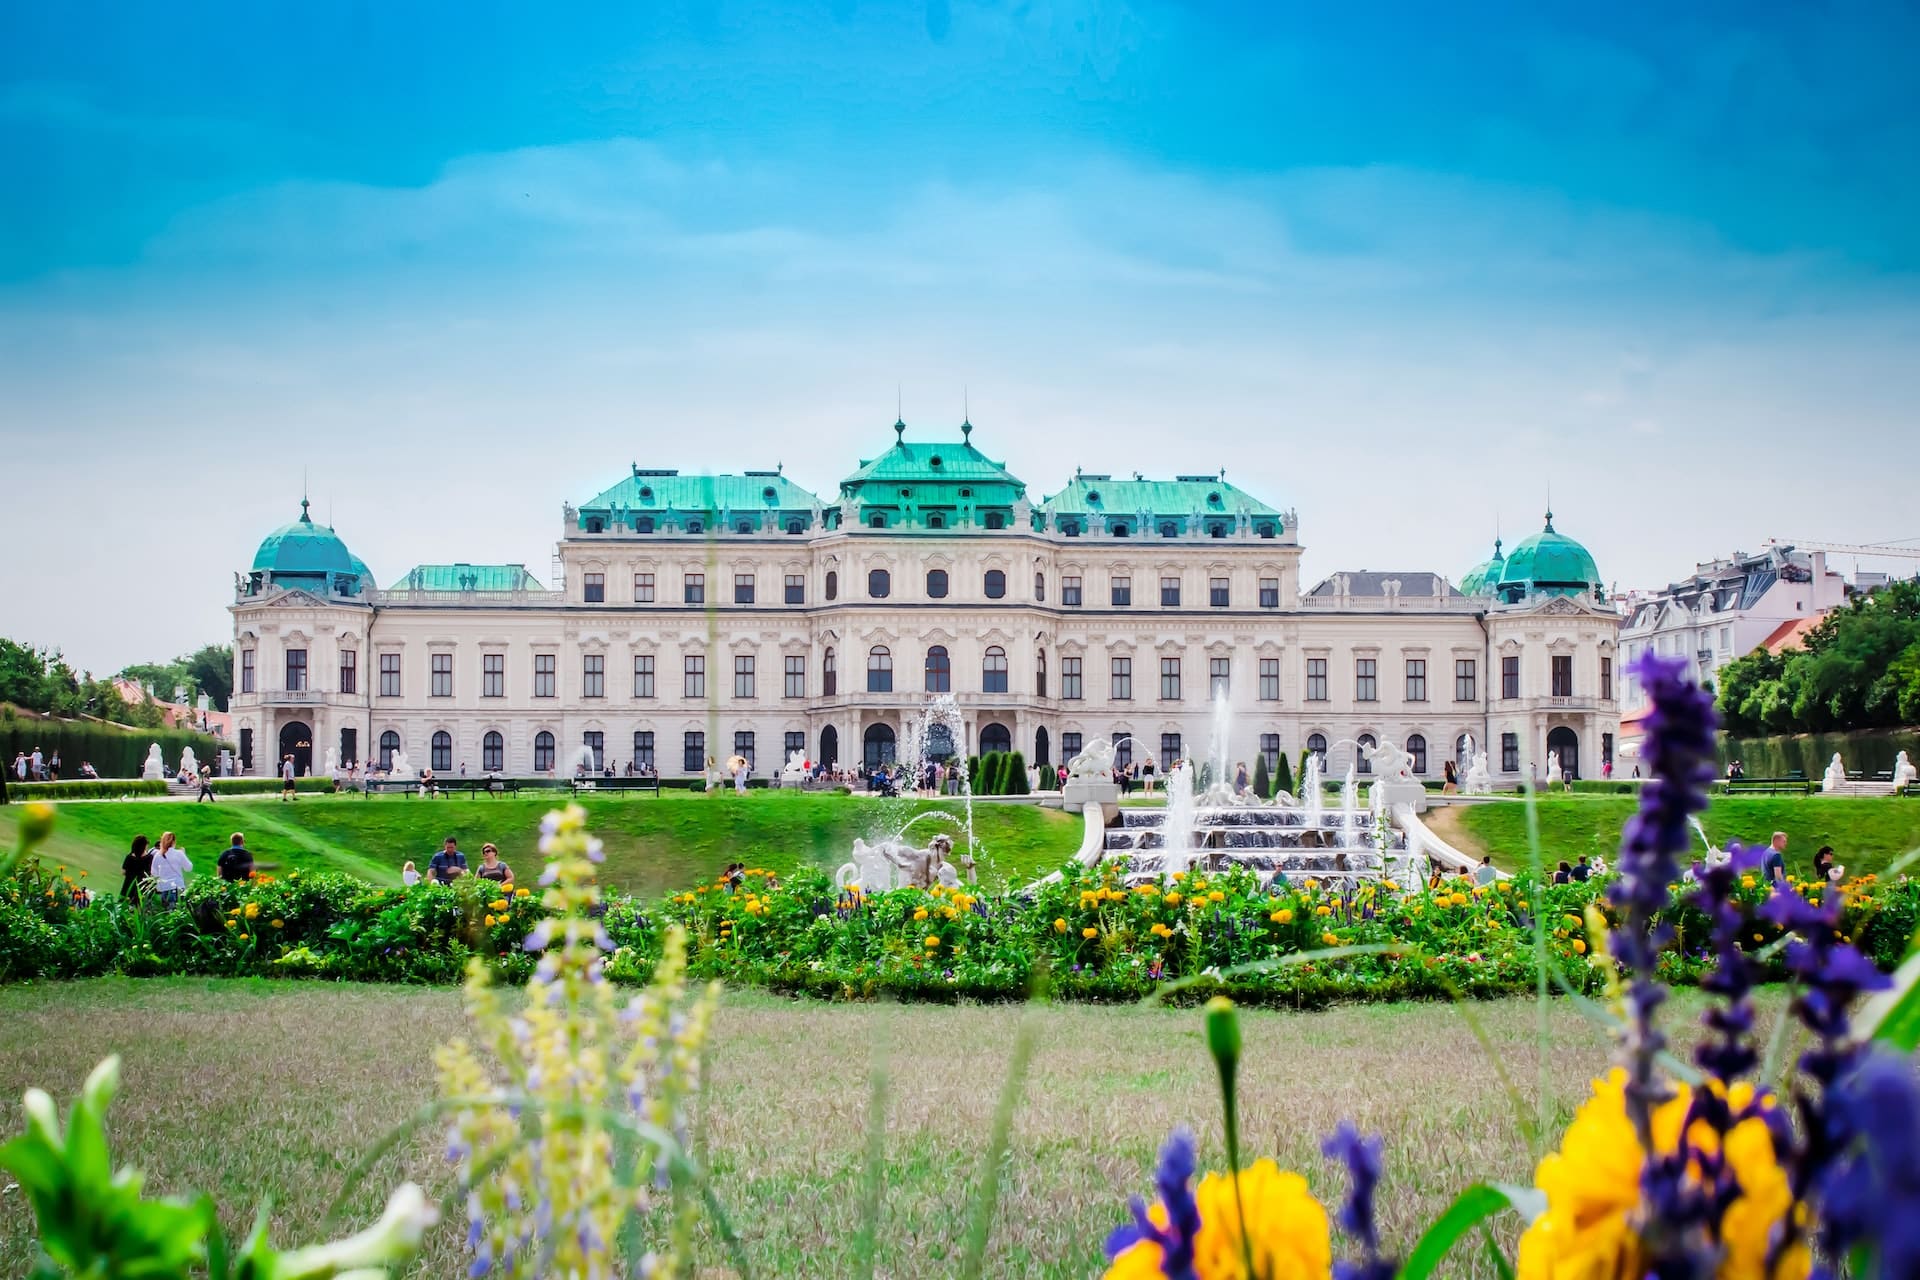 Home to the impressive Belvedere Palace, Landstraße is one of Vienna's most unique districts to stay